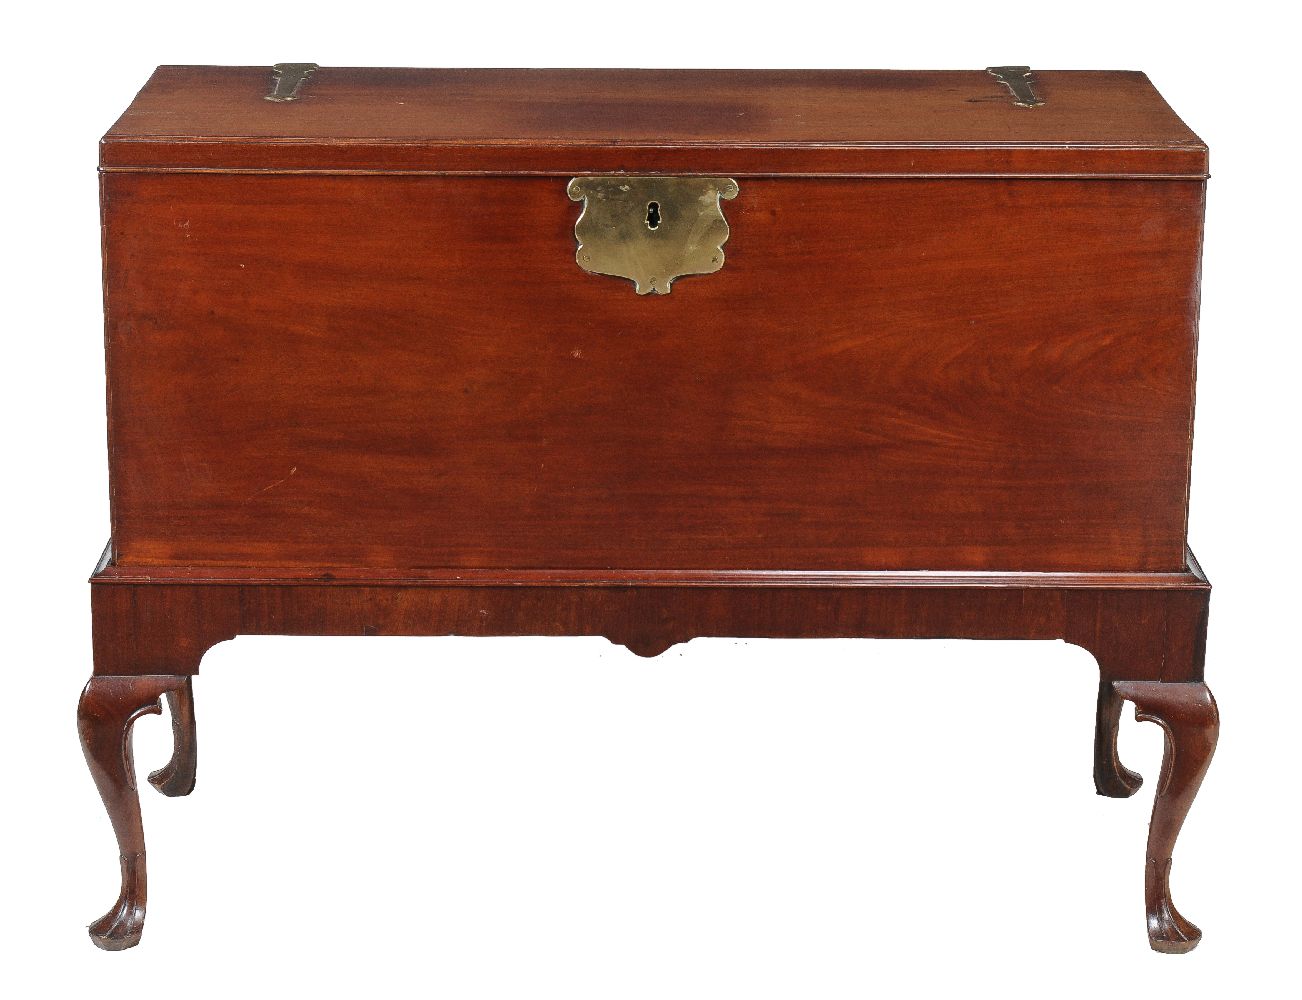 A George II mahogany and brass mounted chest on stand, circa 1750, possibly Irish, 88cm high,